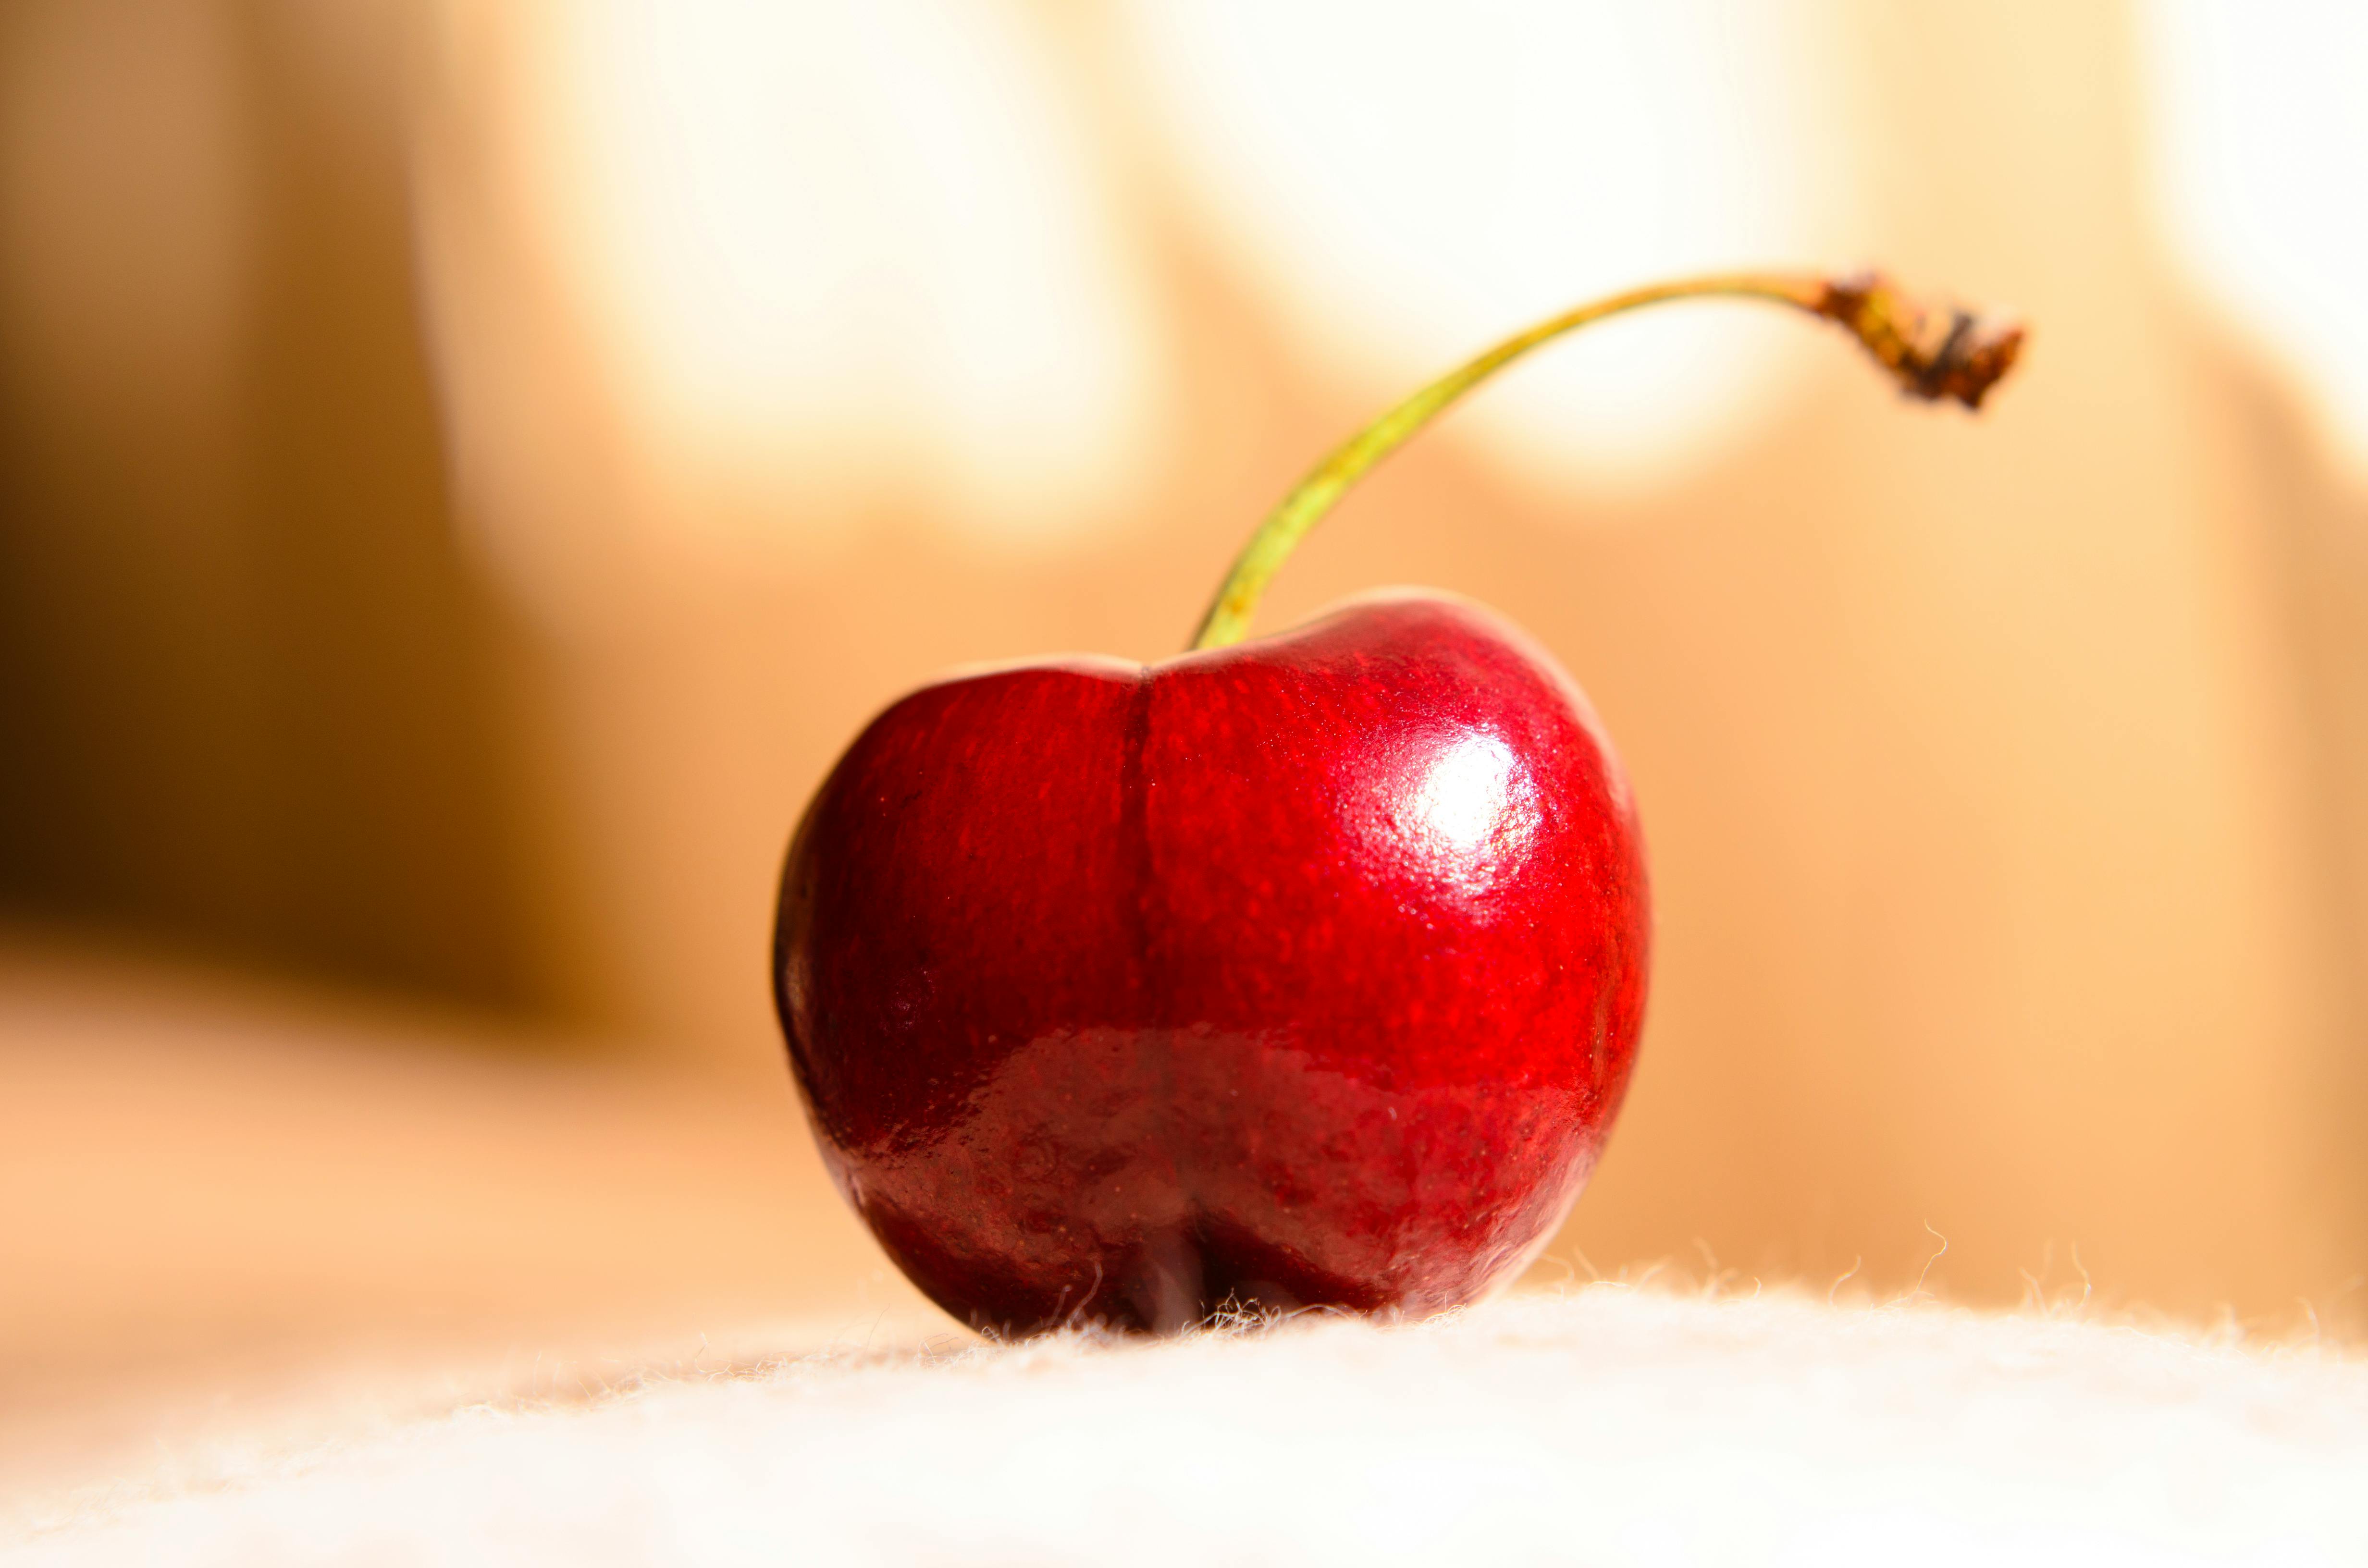 Close Up Photo Of Red Cherry Fruit · Free Stock Photo